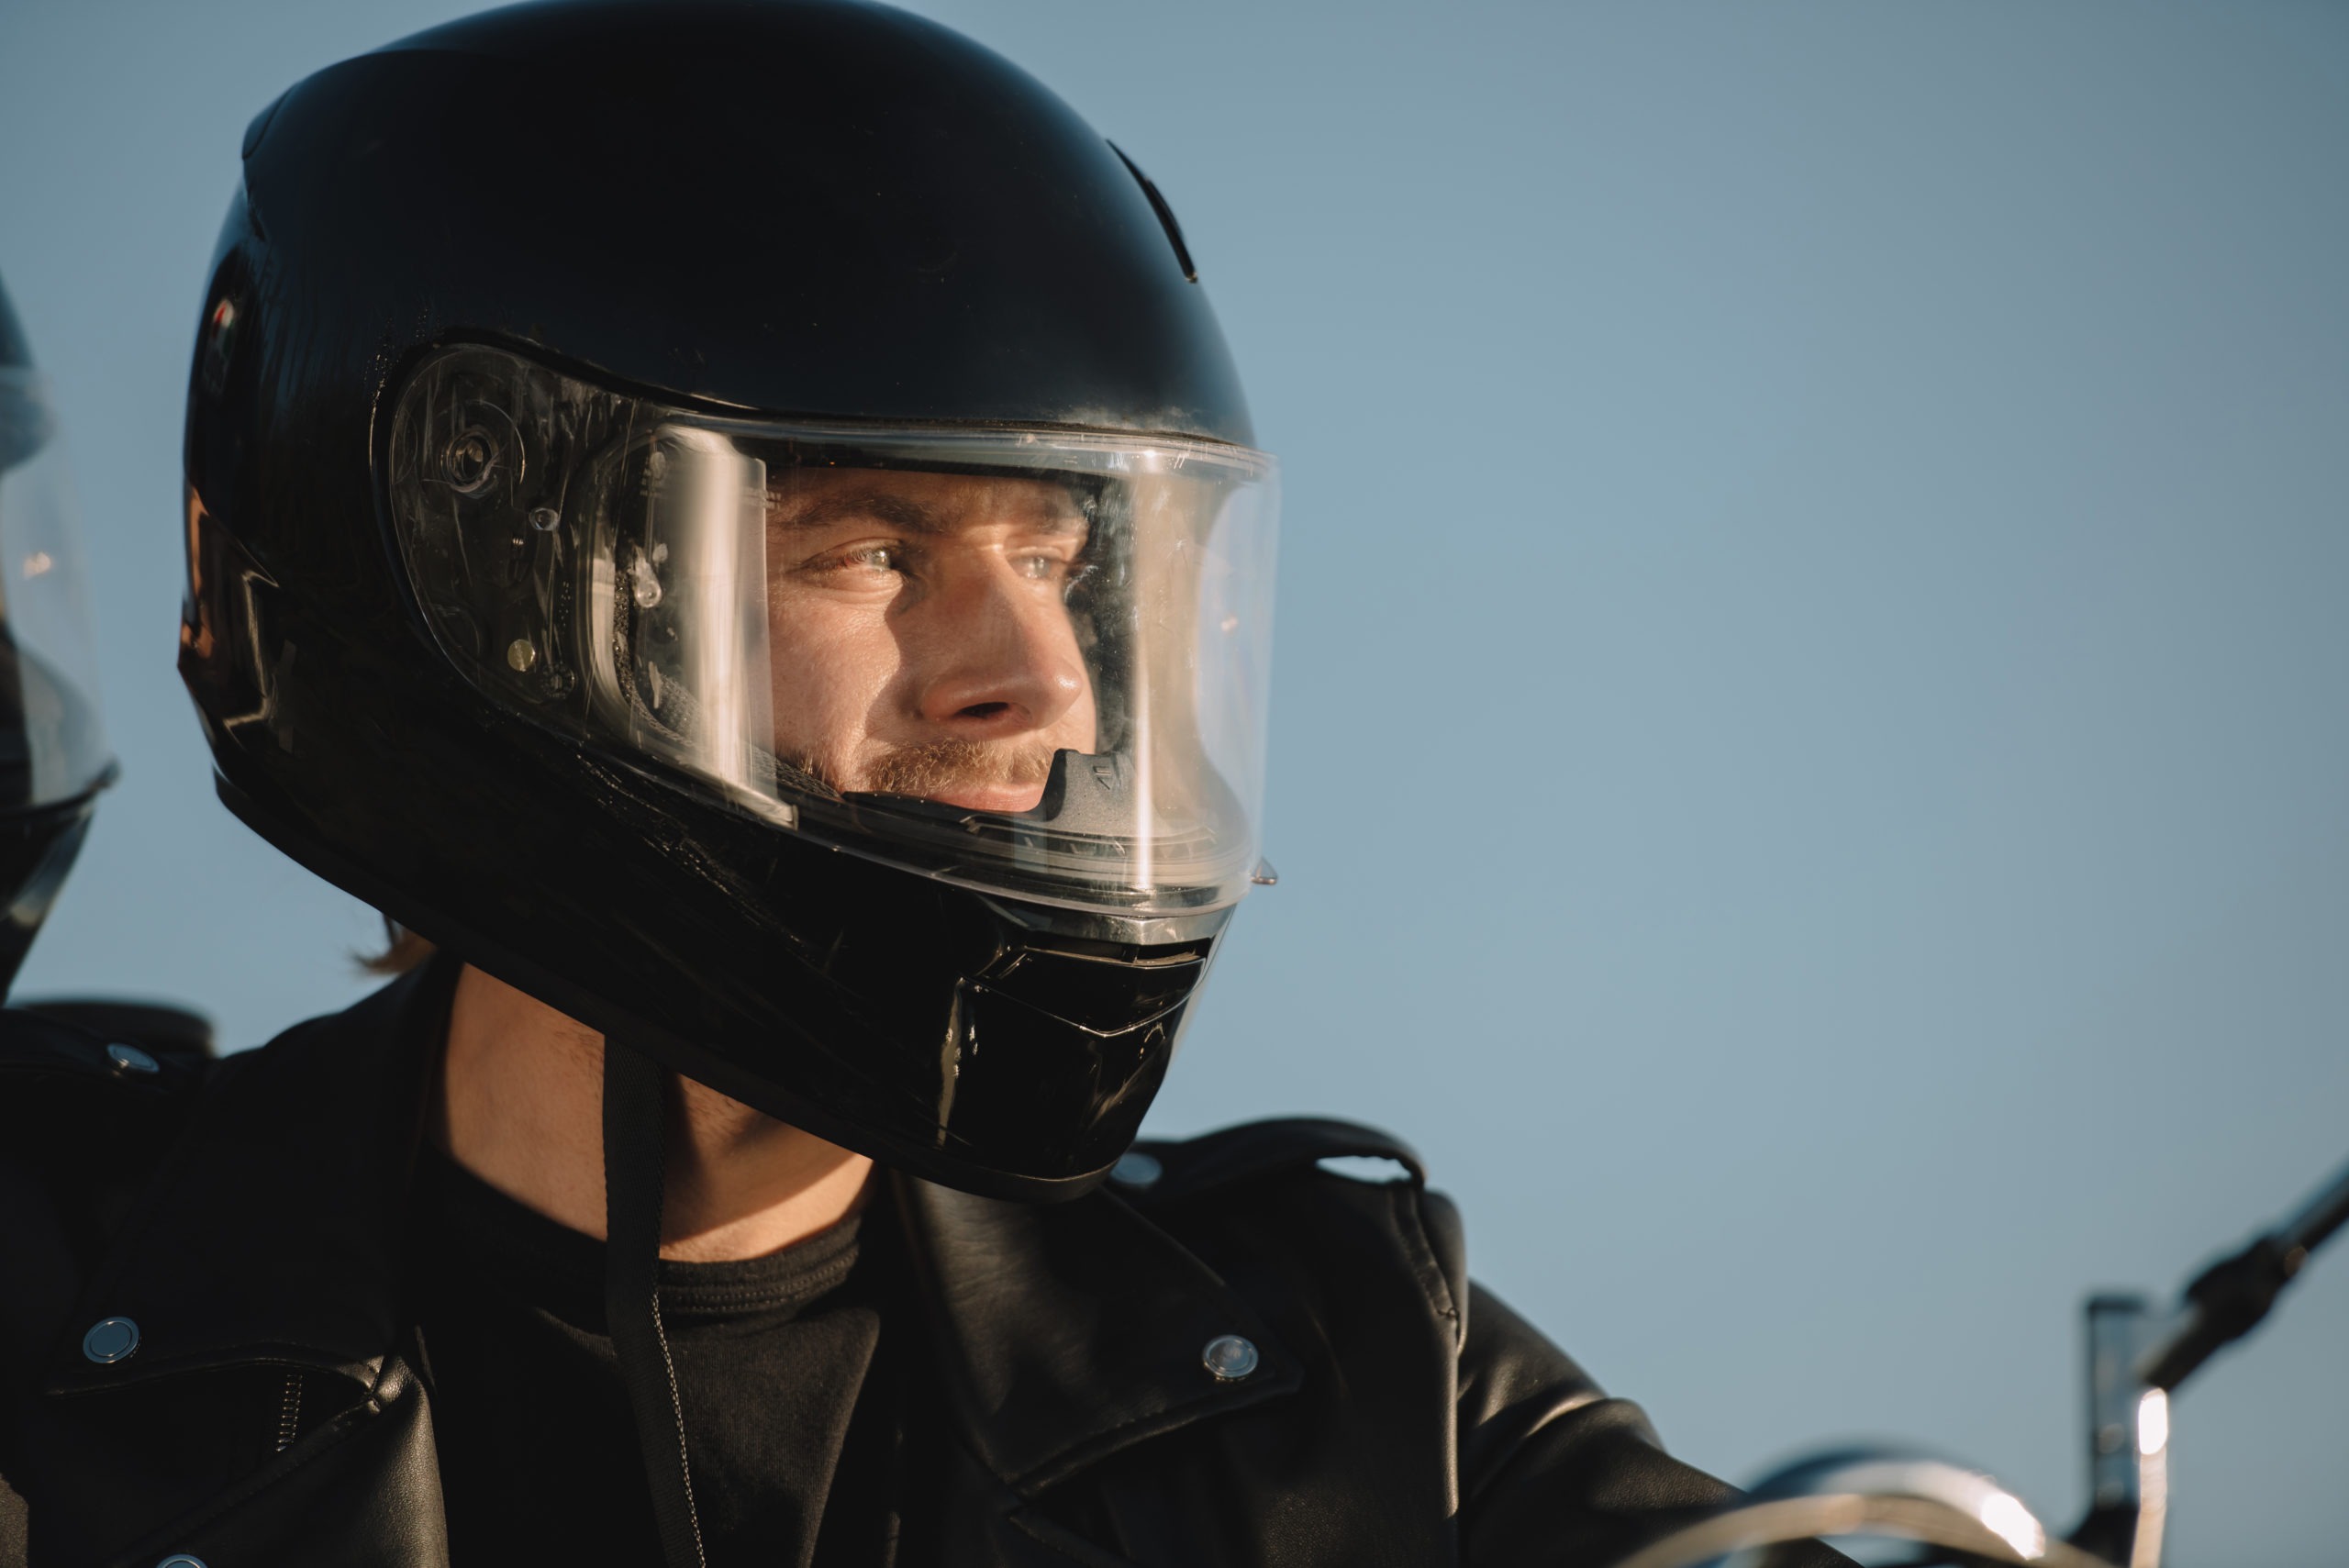 What You Need to Know About Florida’s Motorcycle Helmet Laws